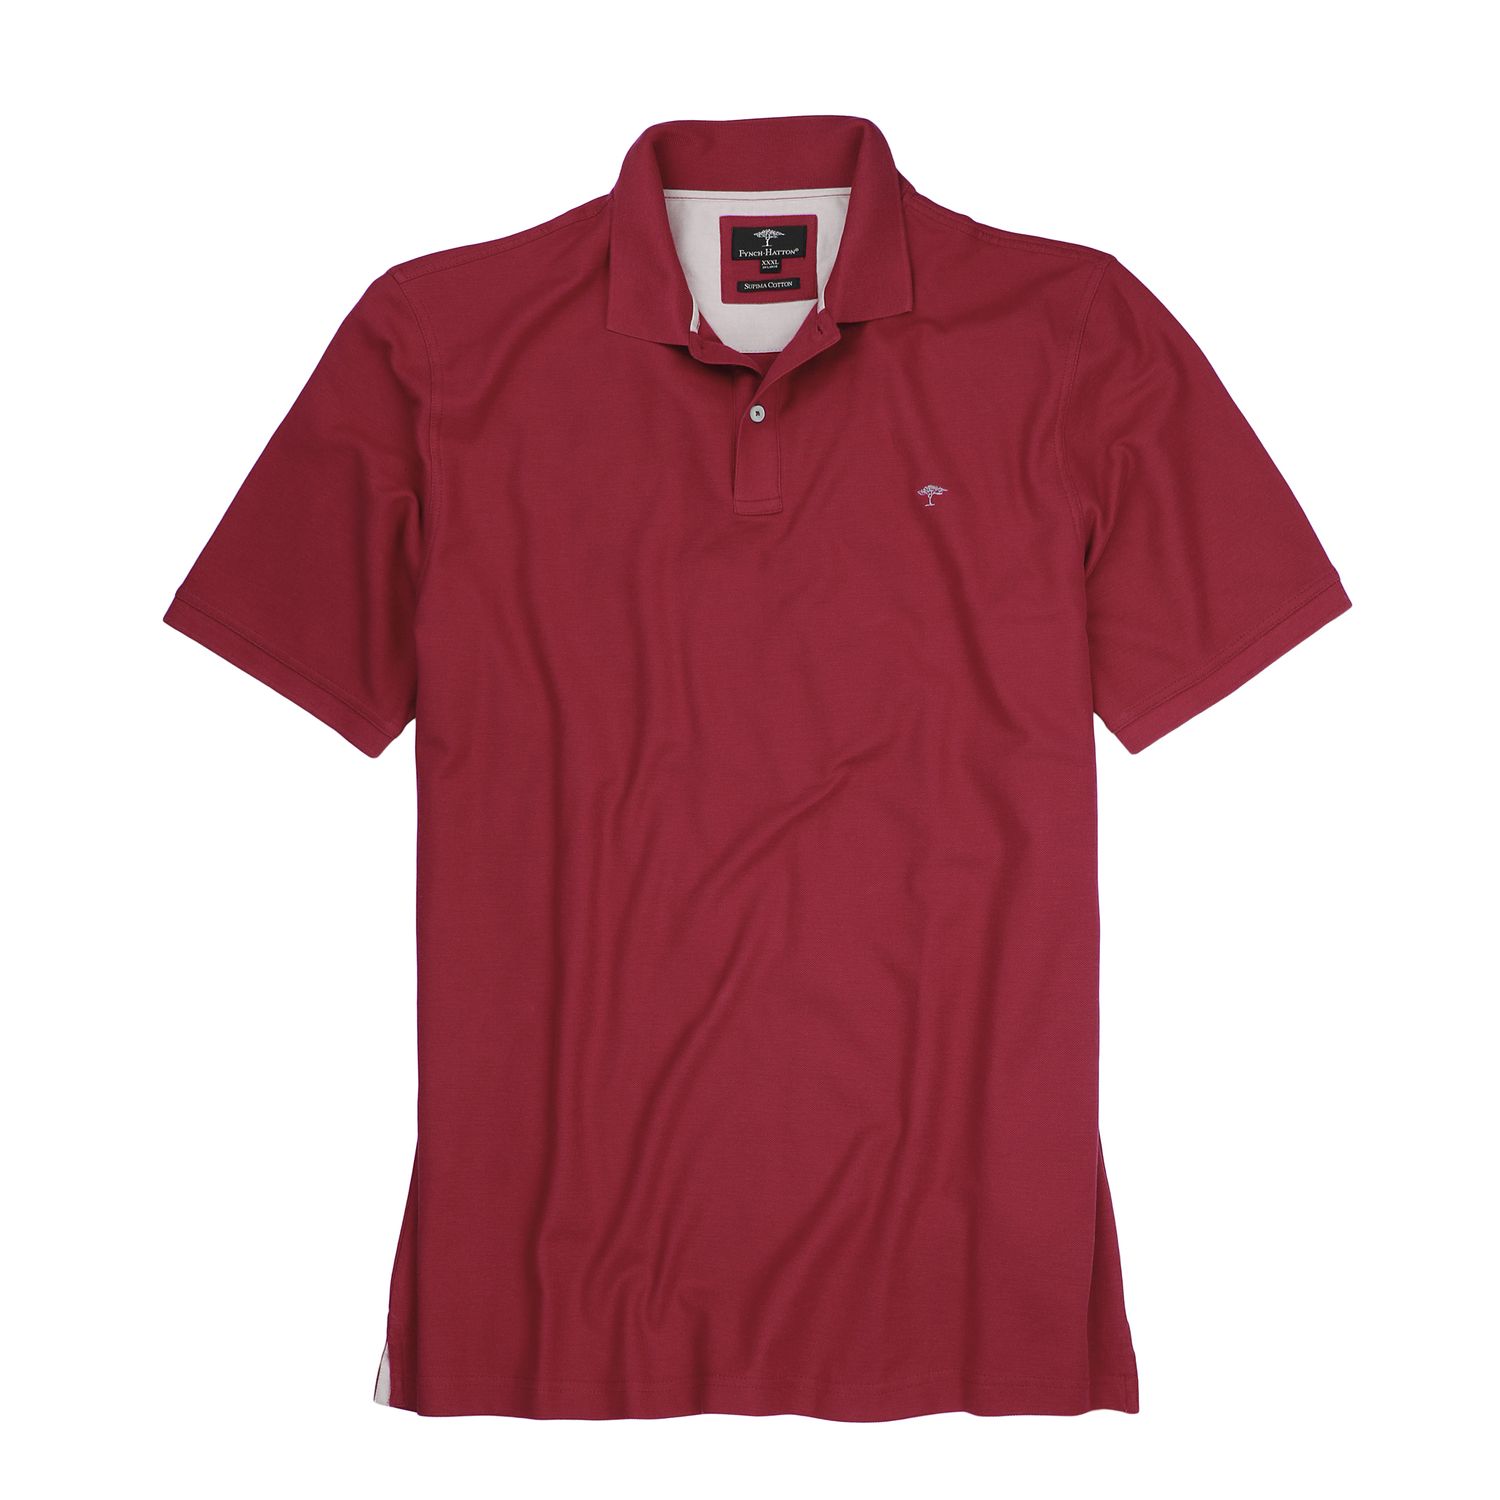 Polo shirt for men by Fynch-Hatton in burgundy red up to oversize 6XL 